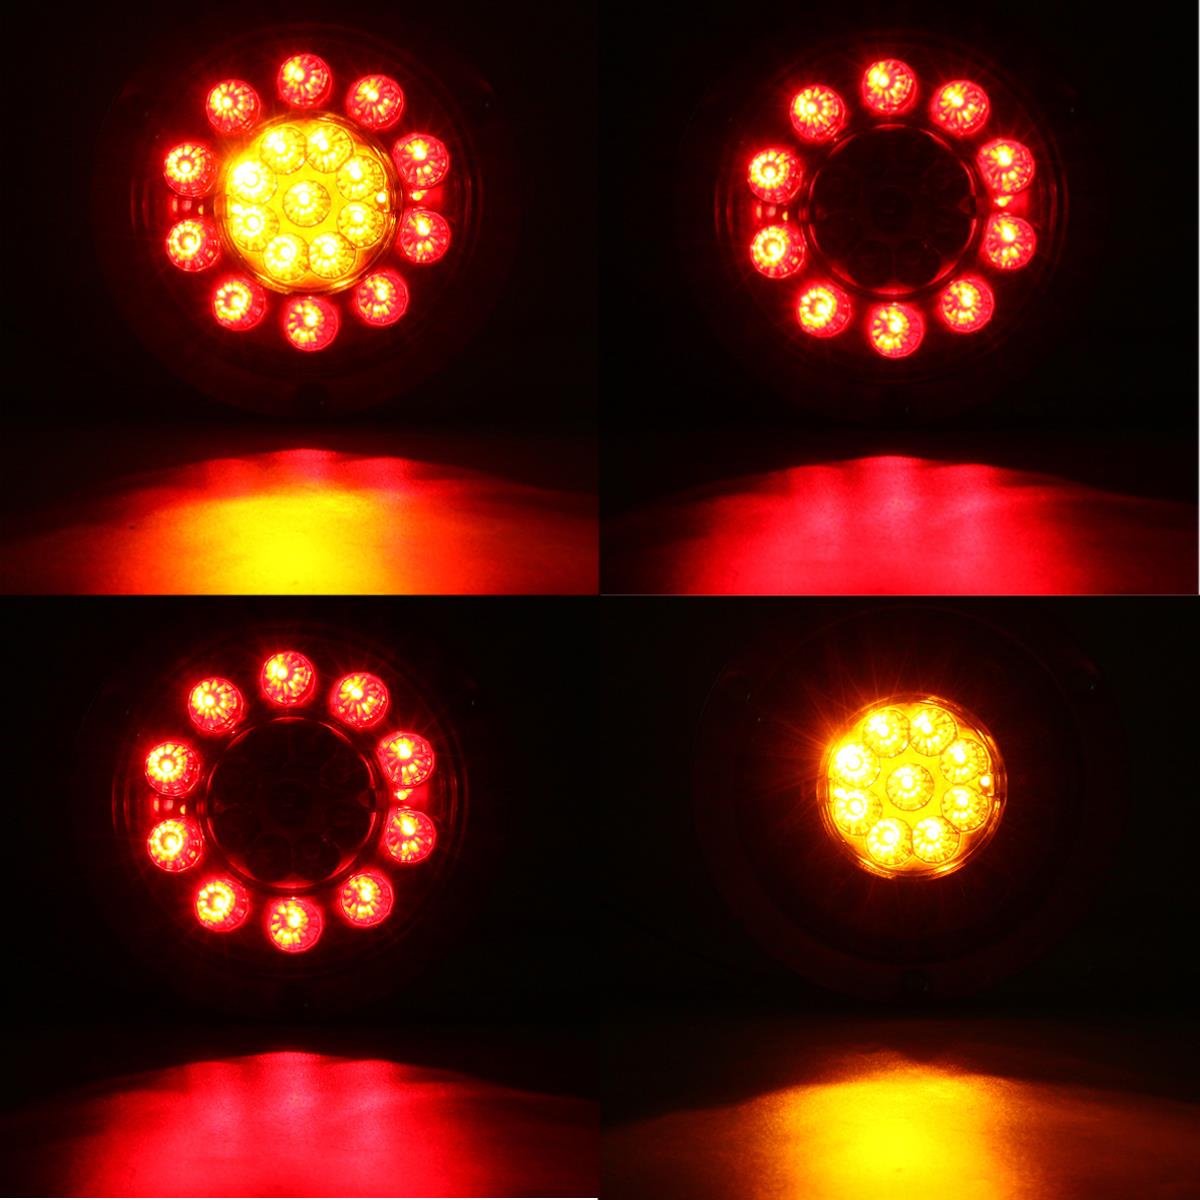 19-LED-Truck-Lorry-Brake-Lights-Stop-Turn-Tail-Lamp-Stainless-Steel-Turn-Signal-Stop-Lights-1274015